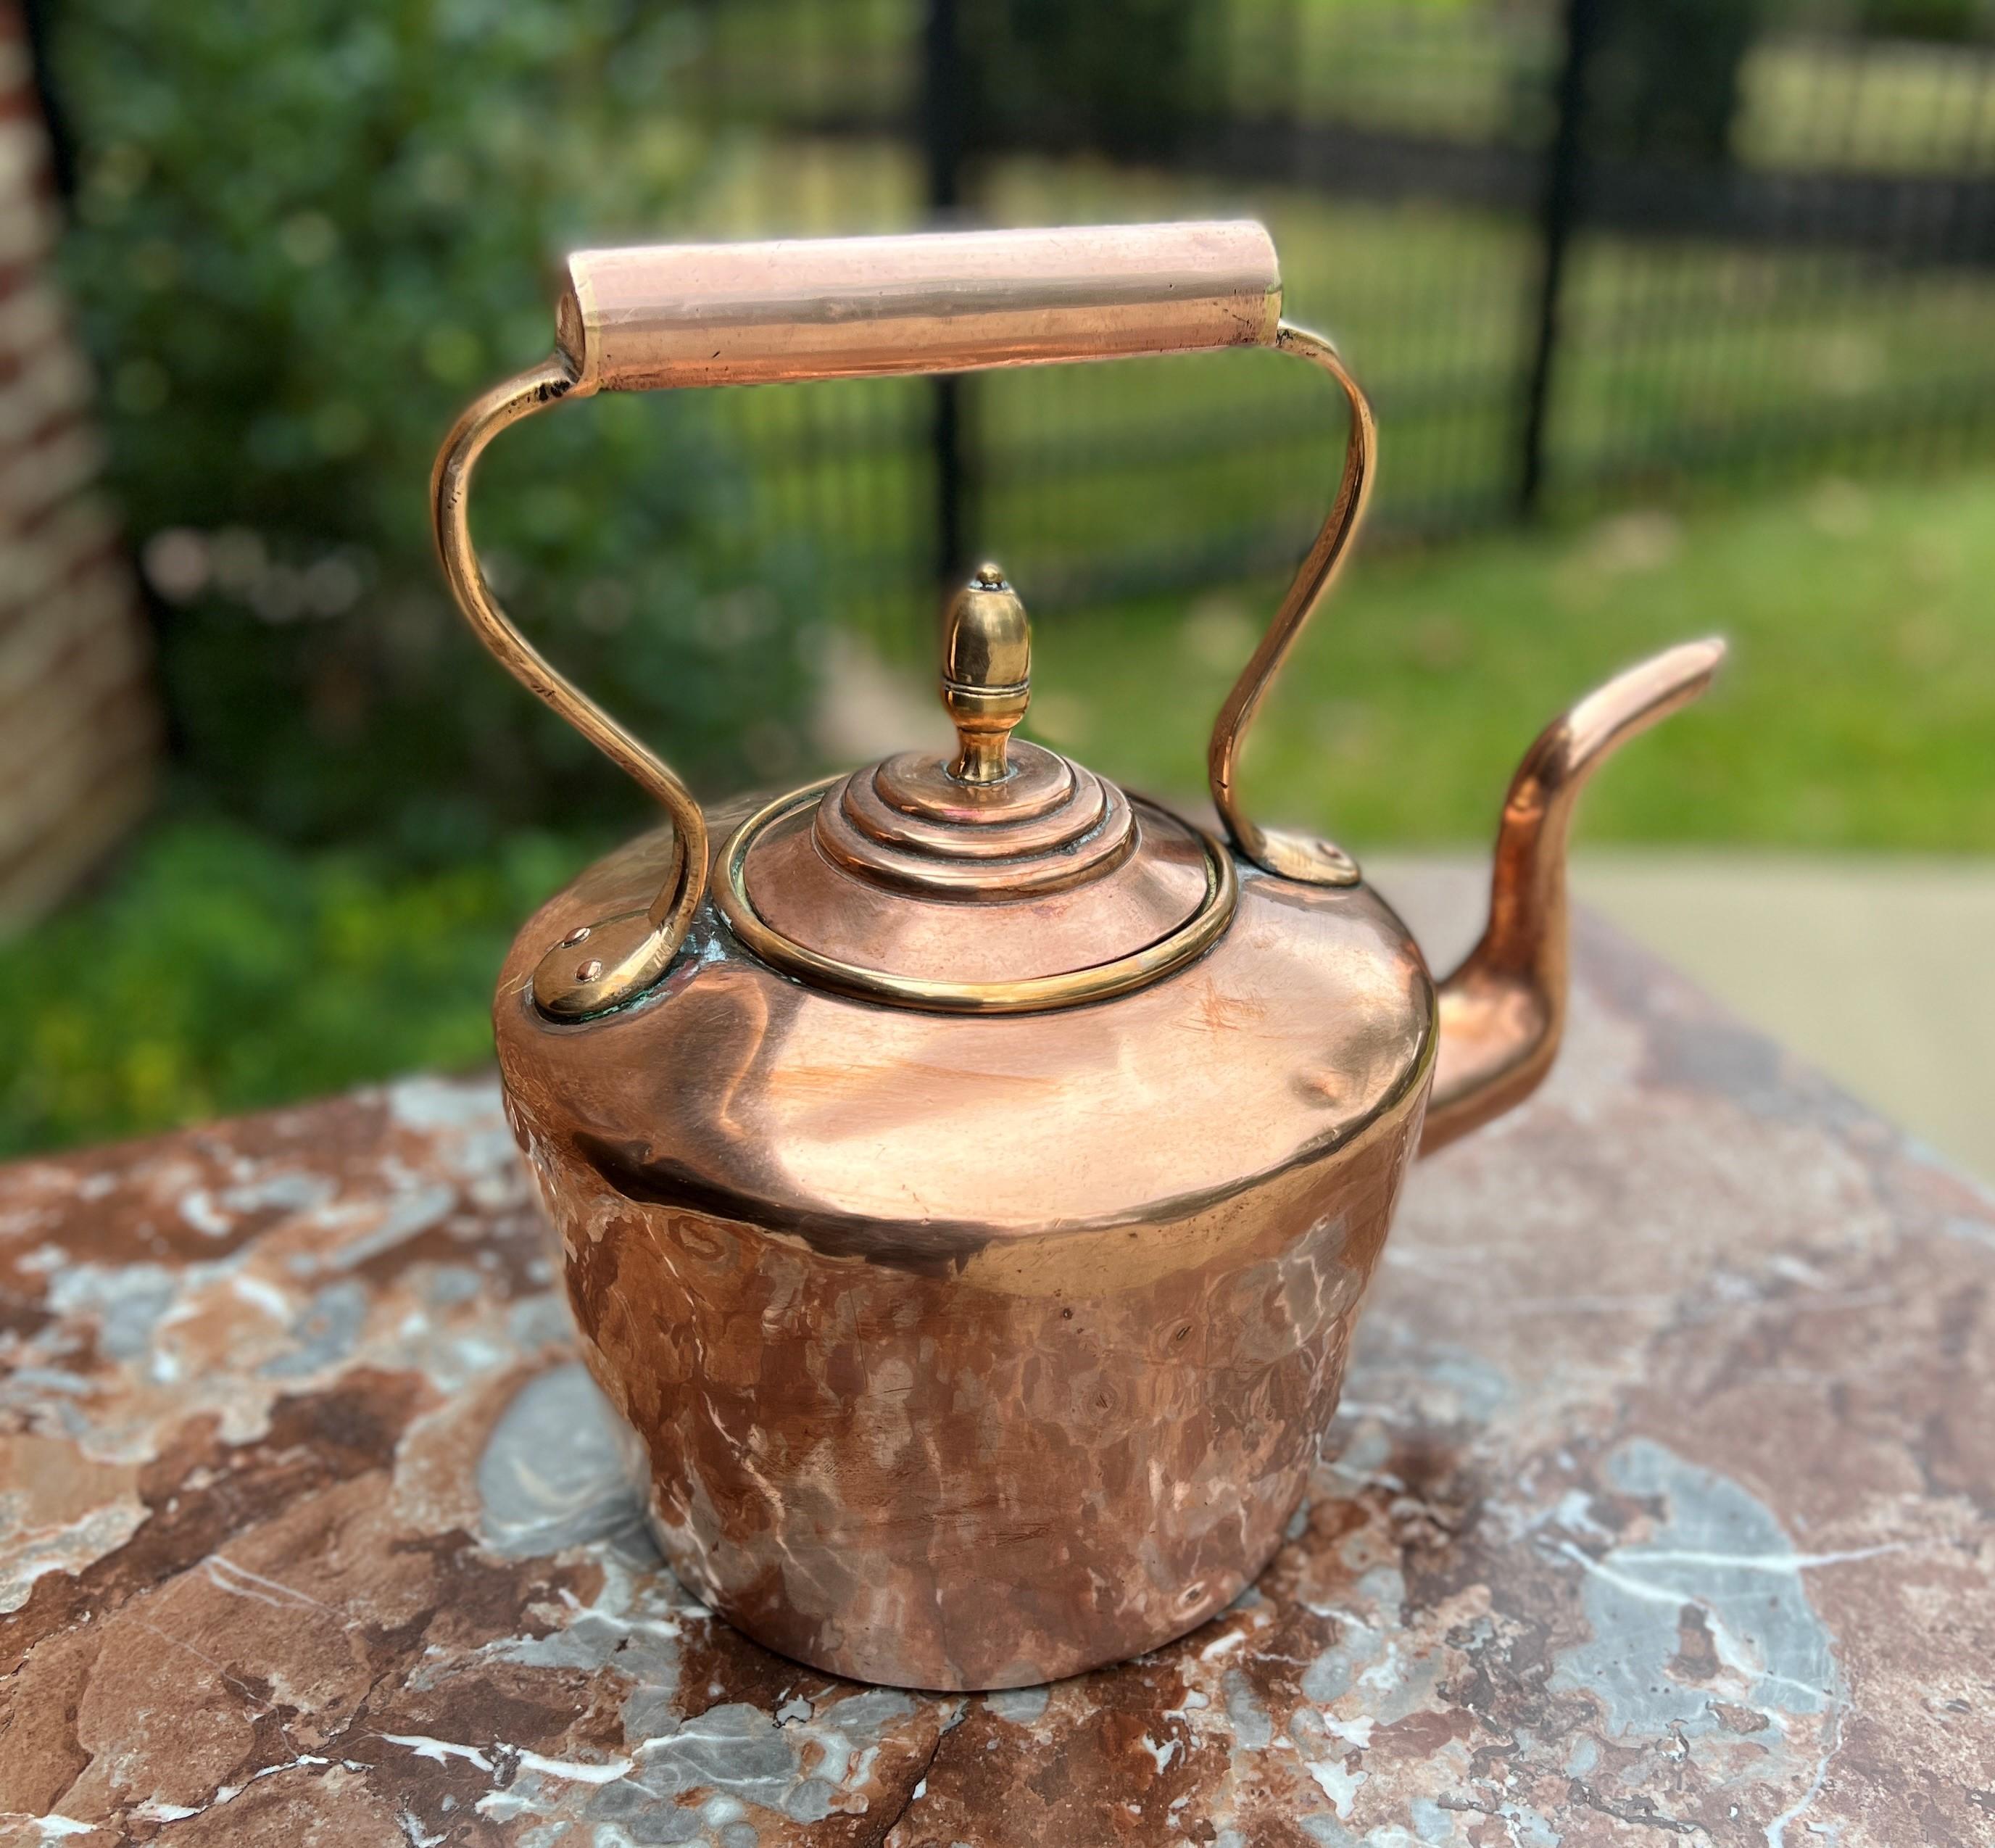 charming antique English copper tea or coffee kettle with pour spout, lid, and copper handle #3~~c. 1900-1920s

